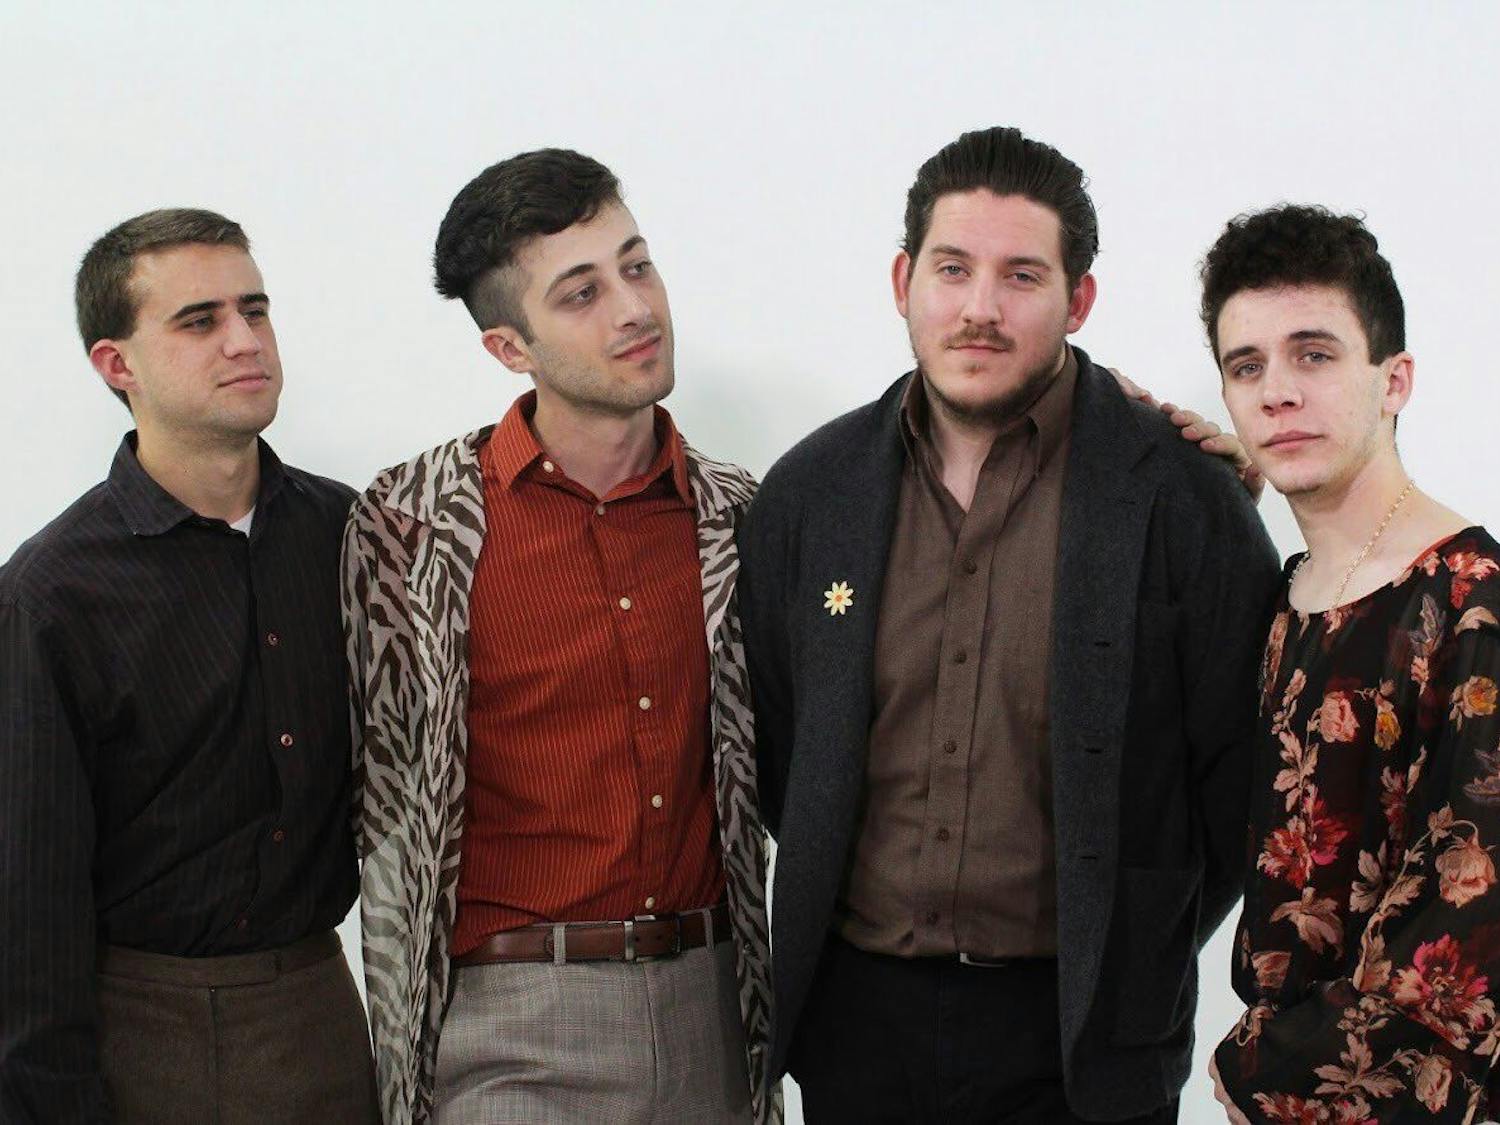 The Forum (L-R) consists of members Ethan Klohr (drums), Jacob Farrell (bass), Nick Wheeler (guitar) and Michael Higgins (vocals). The band formed in Gainesville in late 2015.